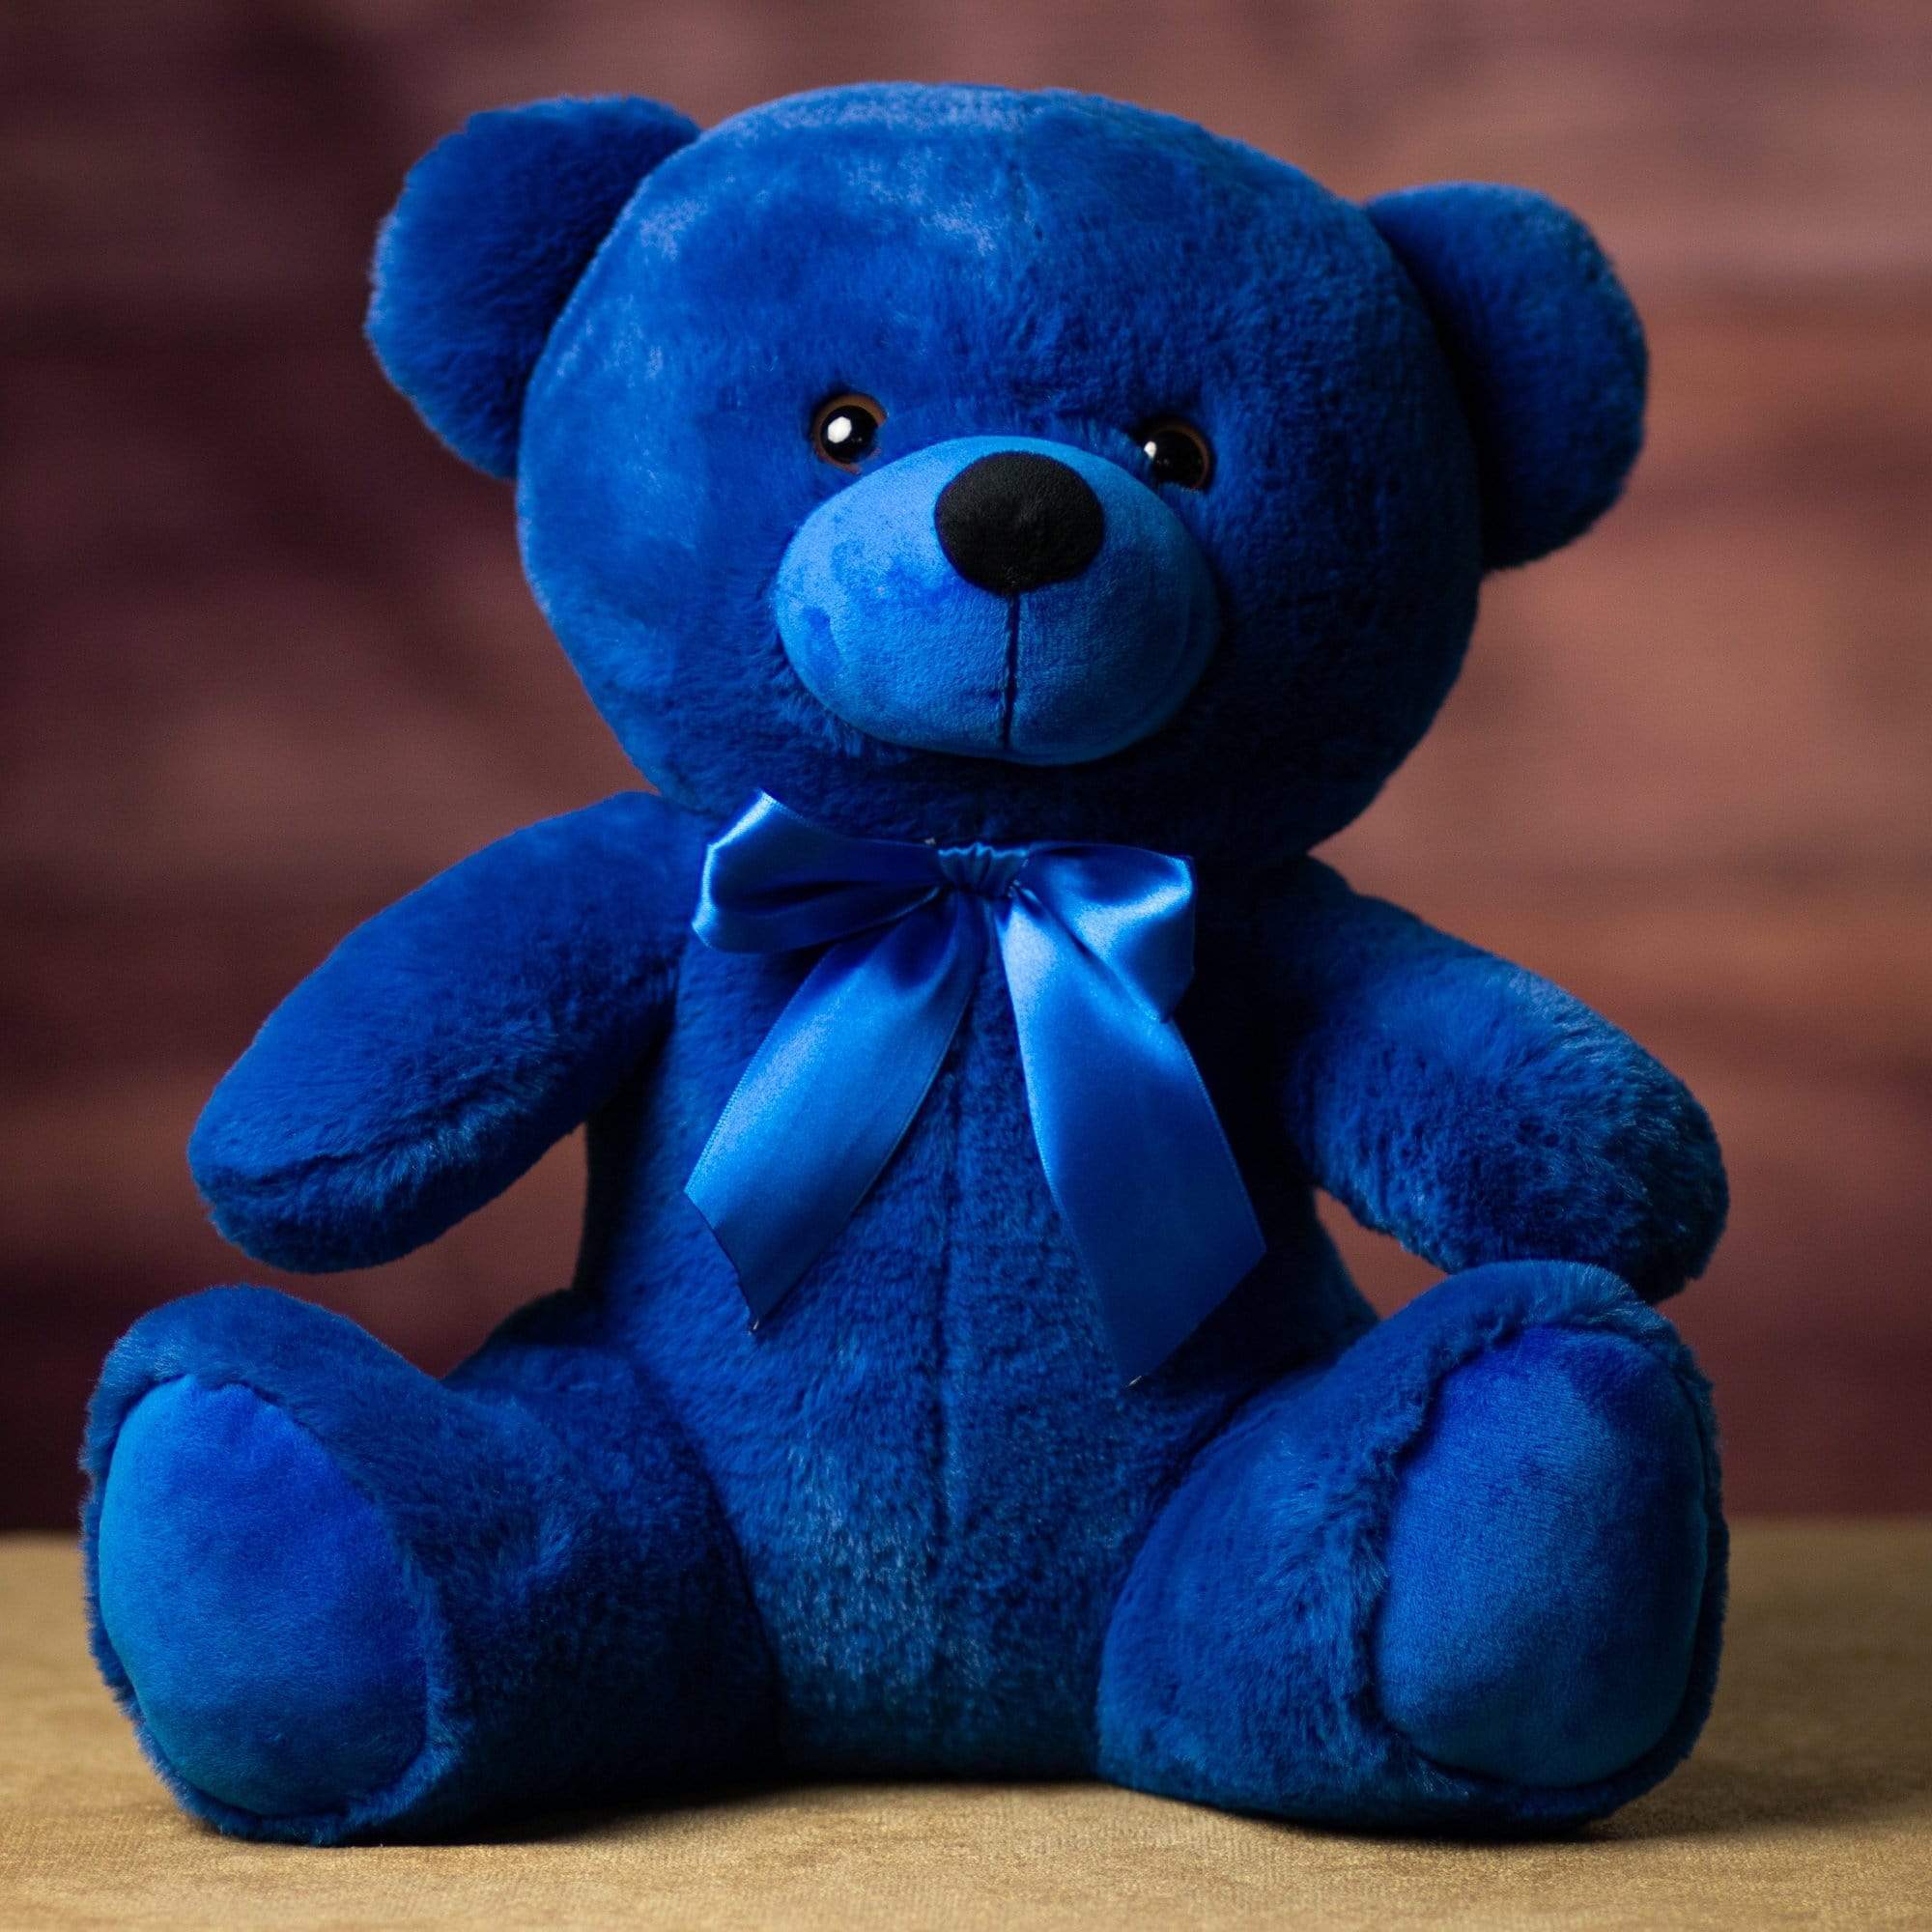 Blue Teddy Stock Photos, Images and Backgrounds for Free Download